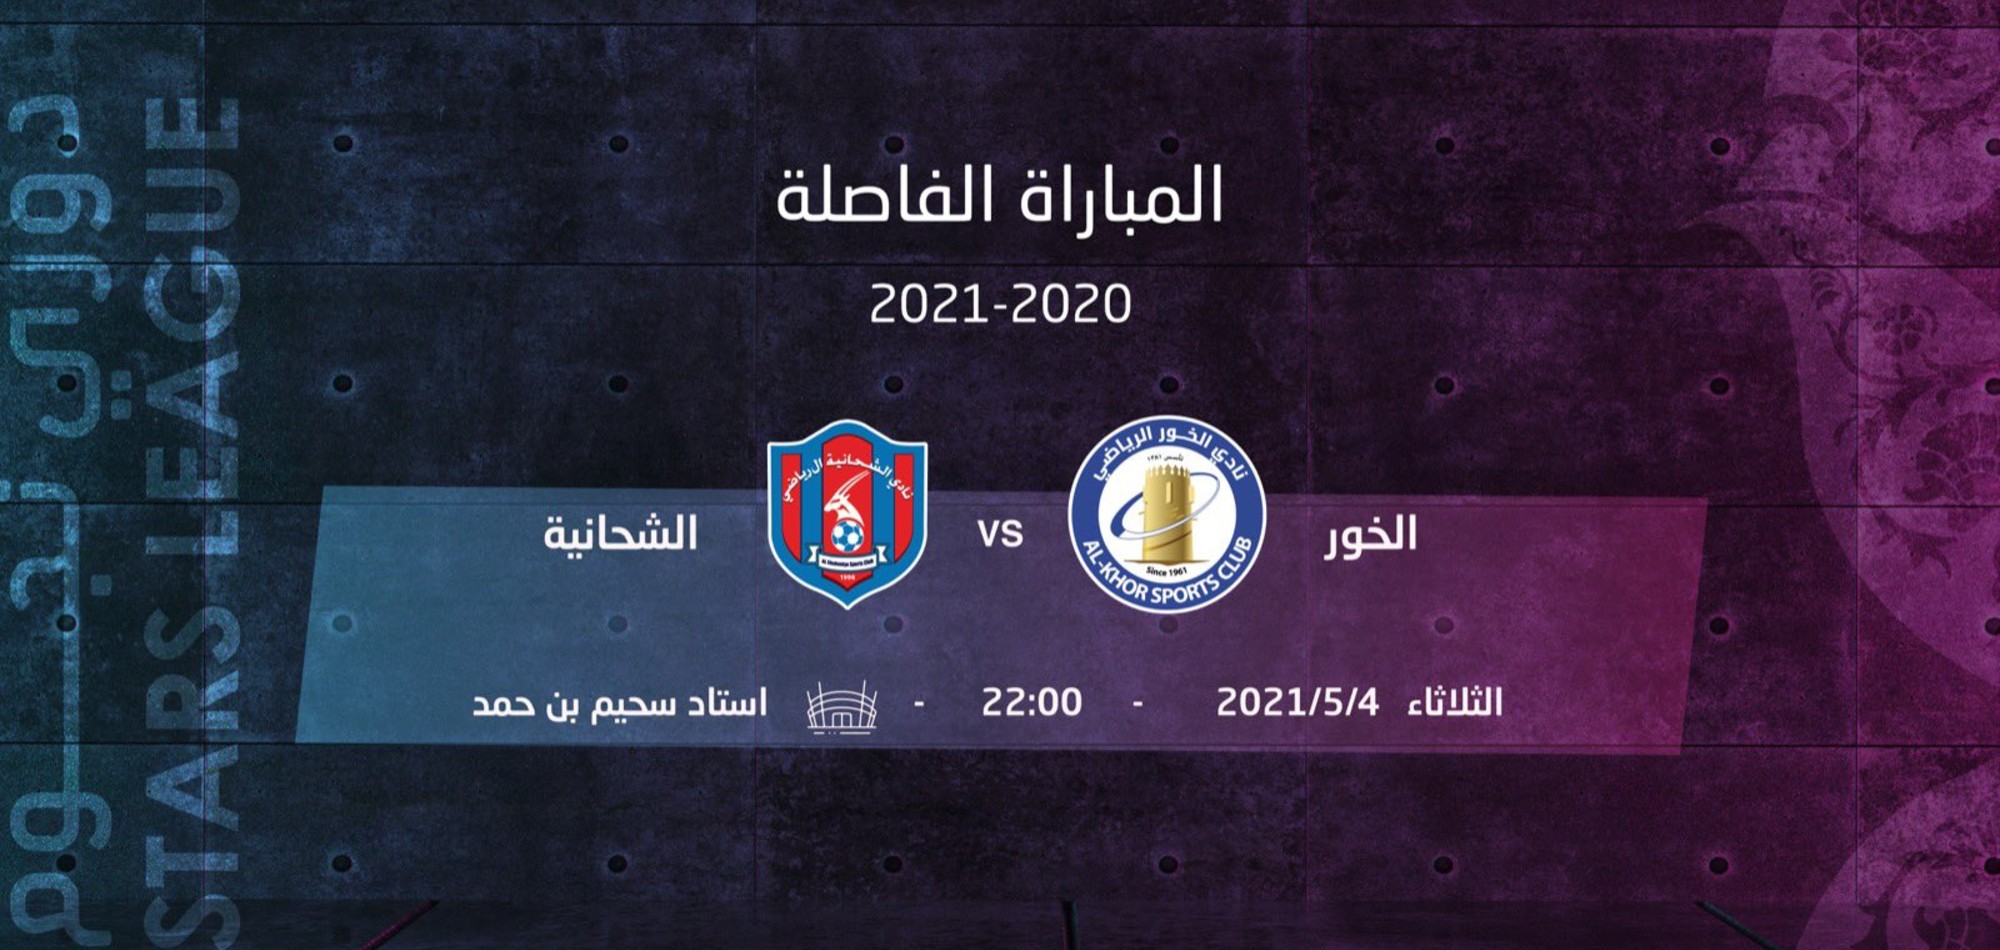 Decisive match for Al Khor and Al Shahania as the loser falls to the Second Division